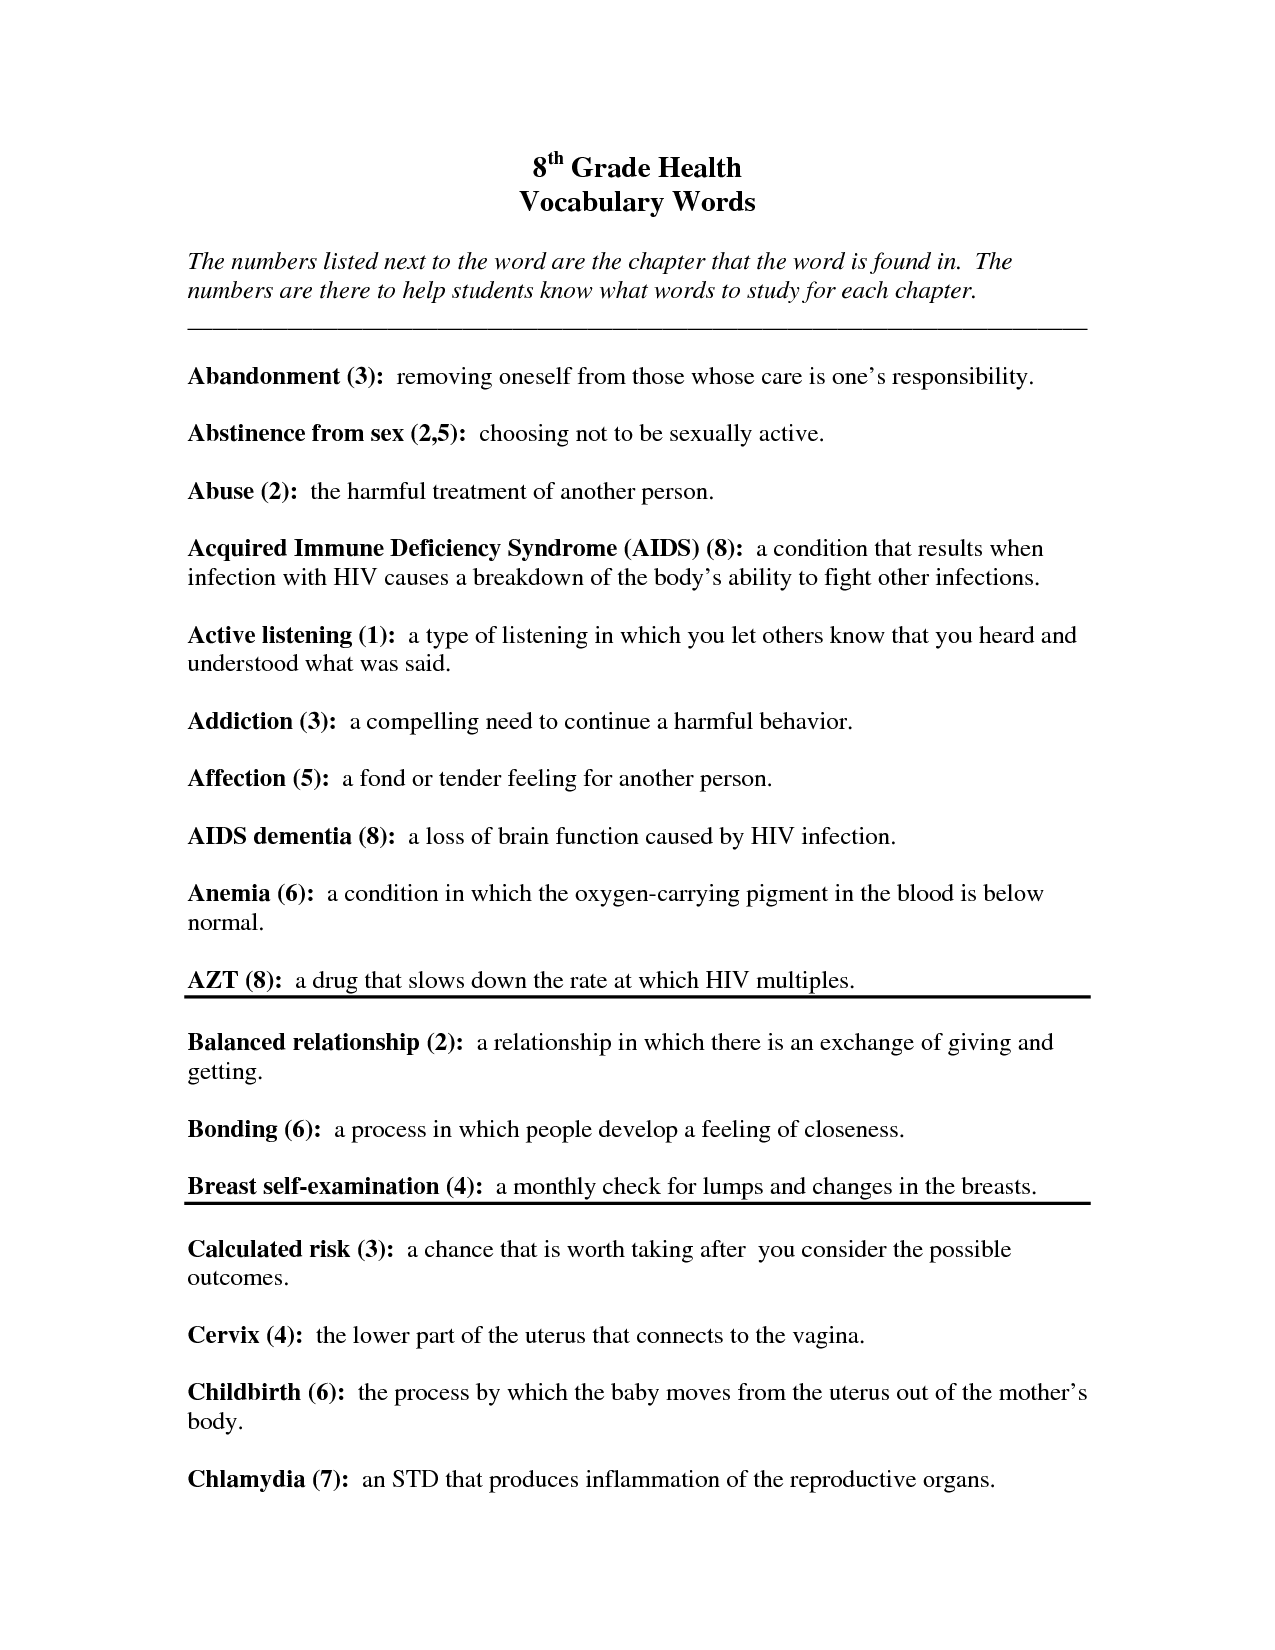 13 Best Images of 7th Grade Life Science Worksheets - Free 7th Grade